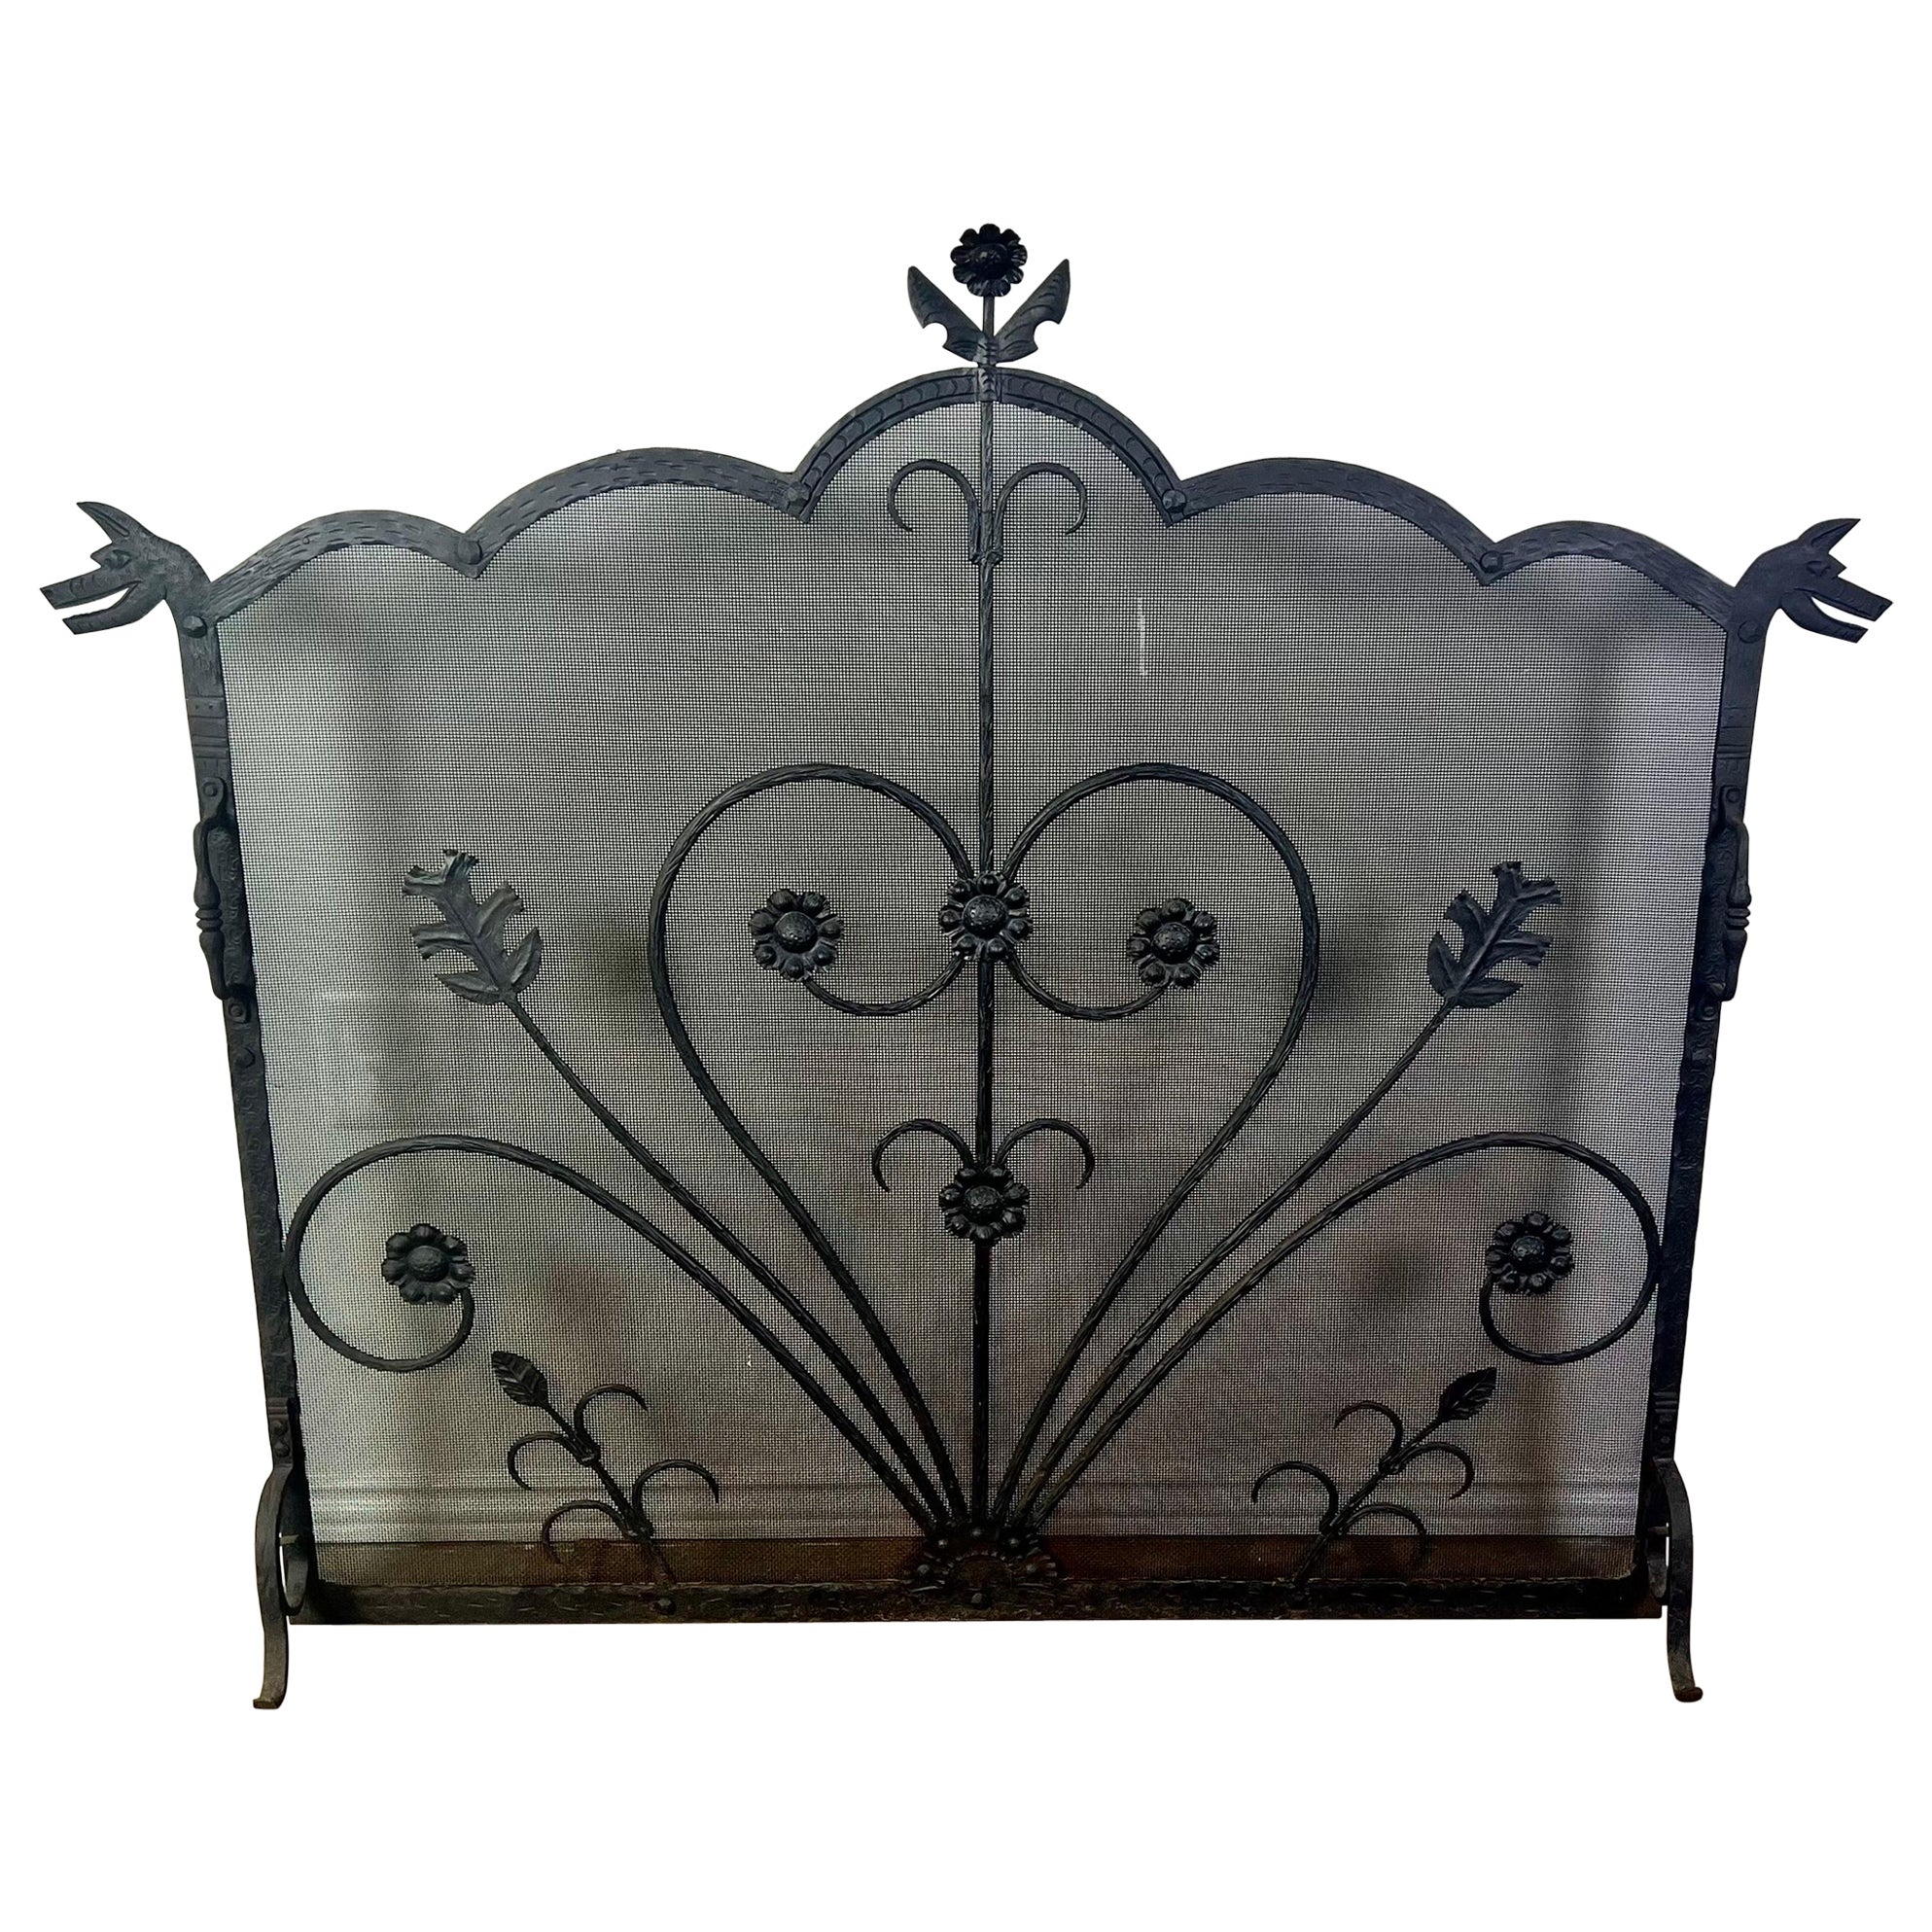 Wrought Iron Fireplace Screen w/ Cast Handles For Sale